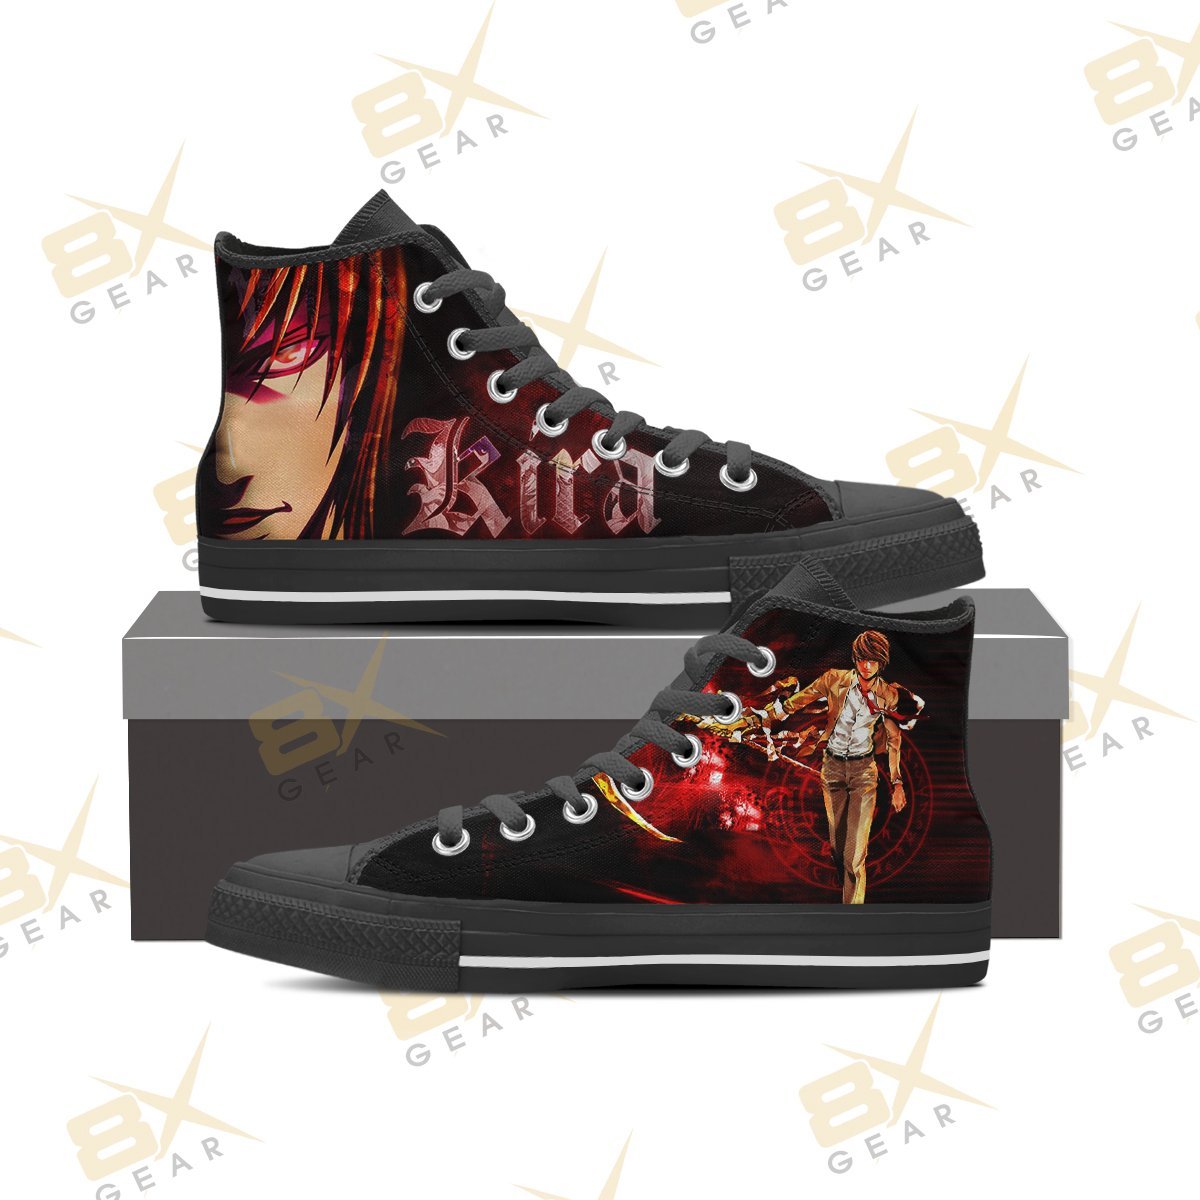 Light Yagami Shoes Death Note Anime Anime Shoes Hi Top Sneakers